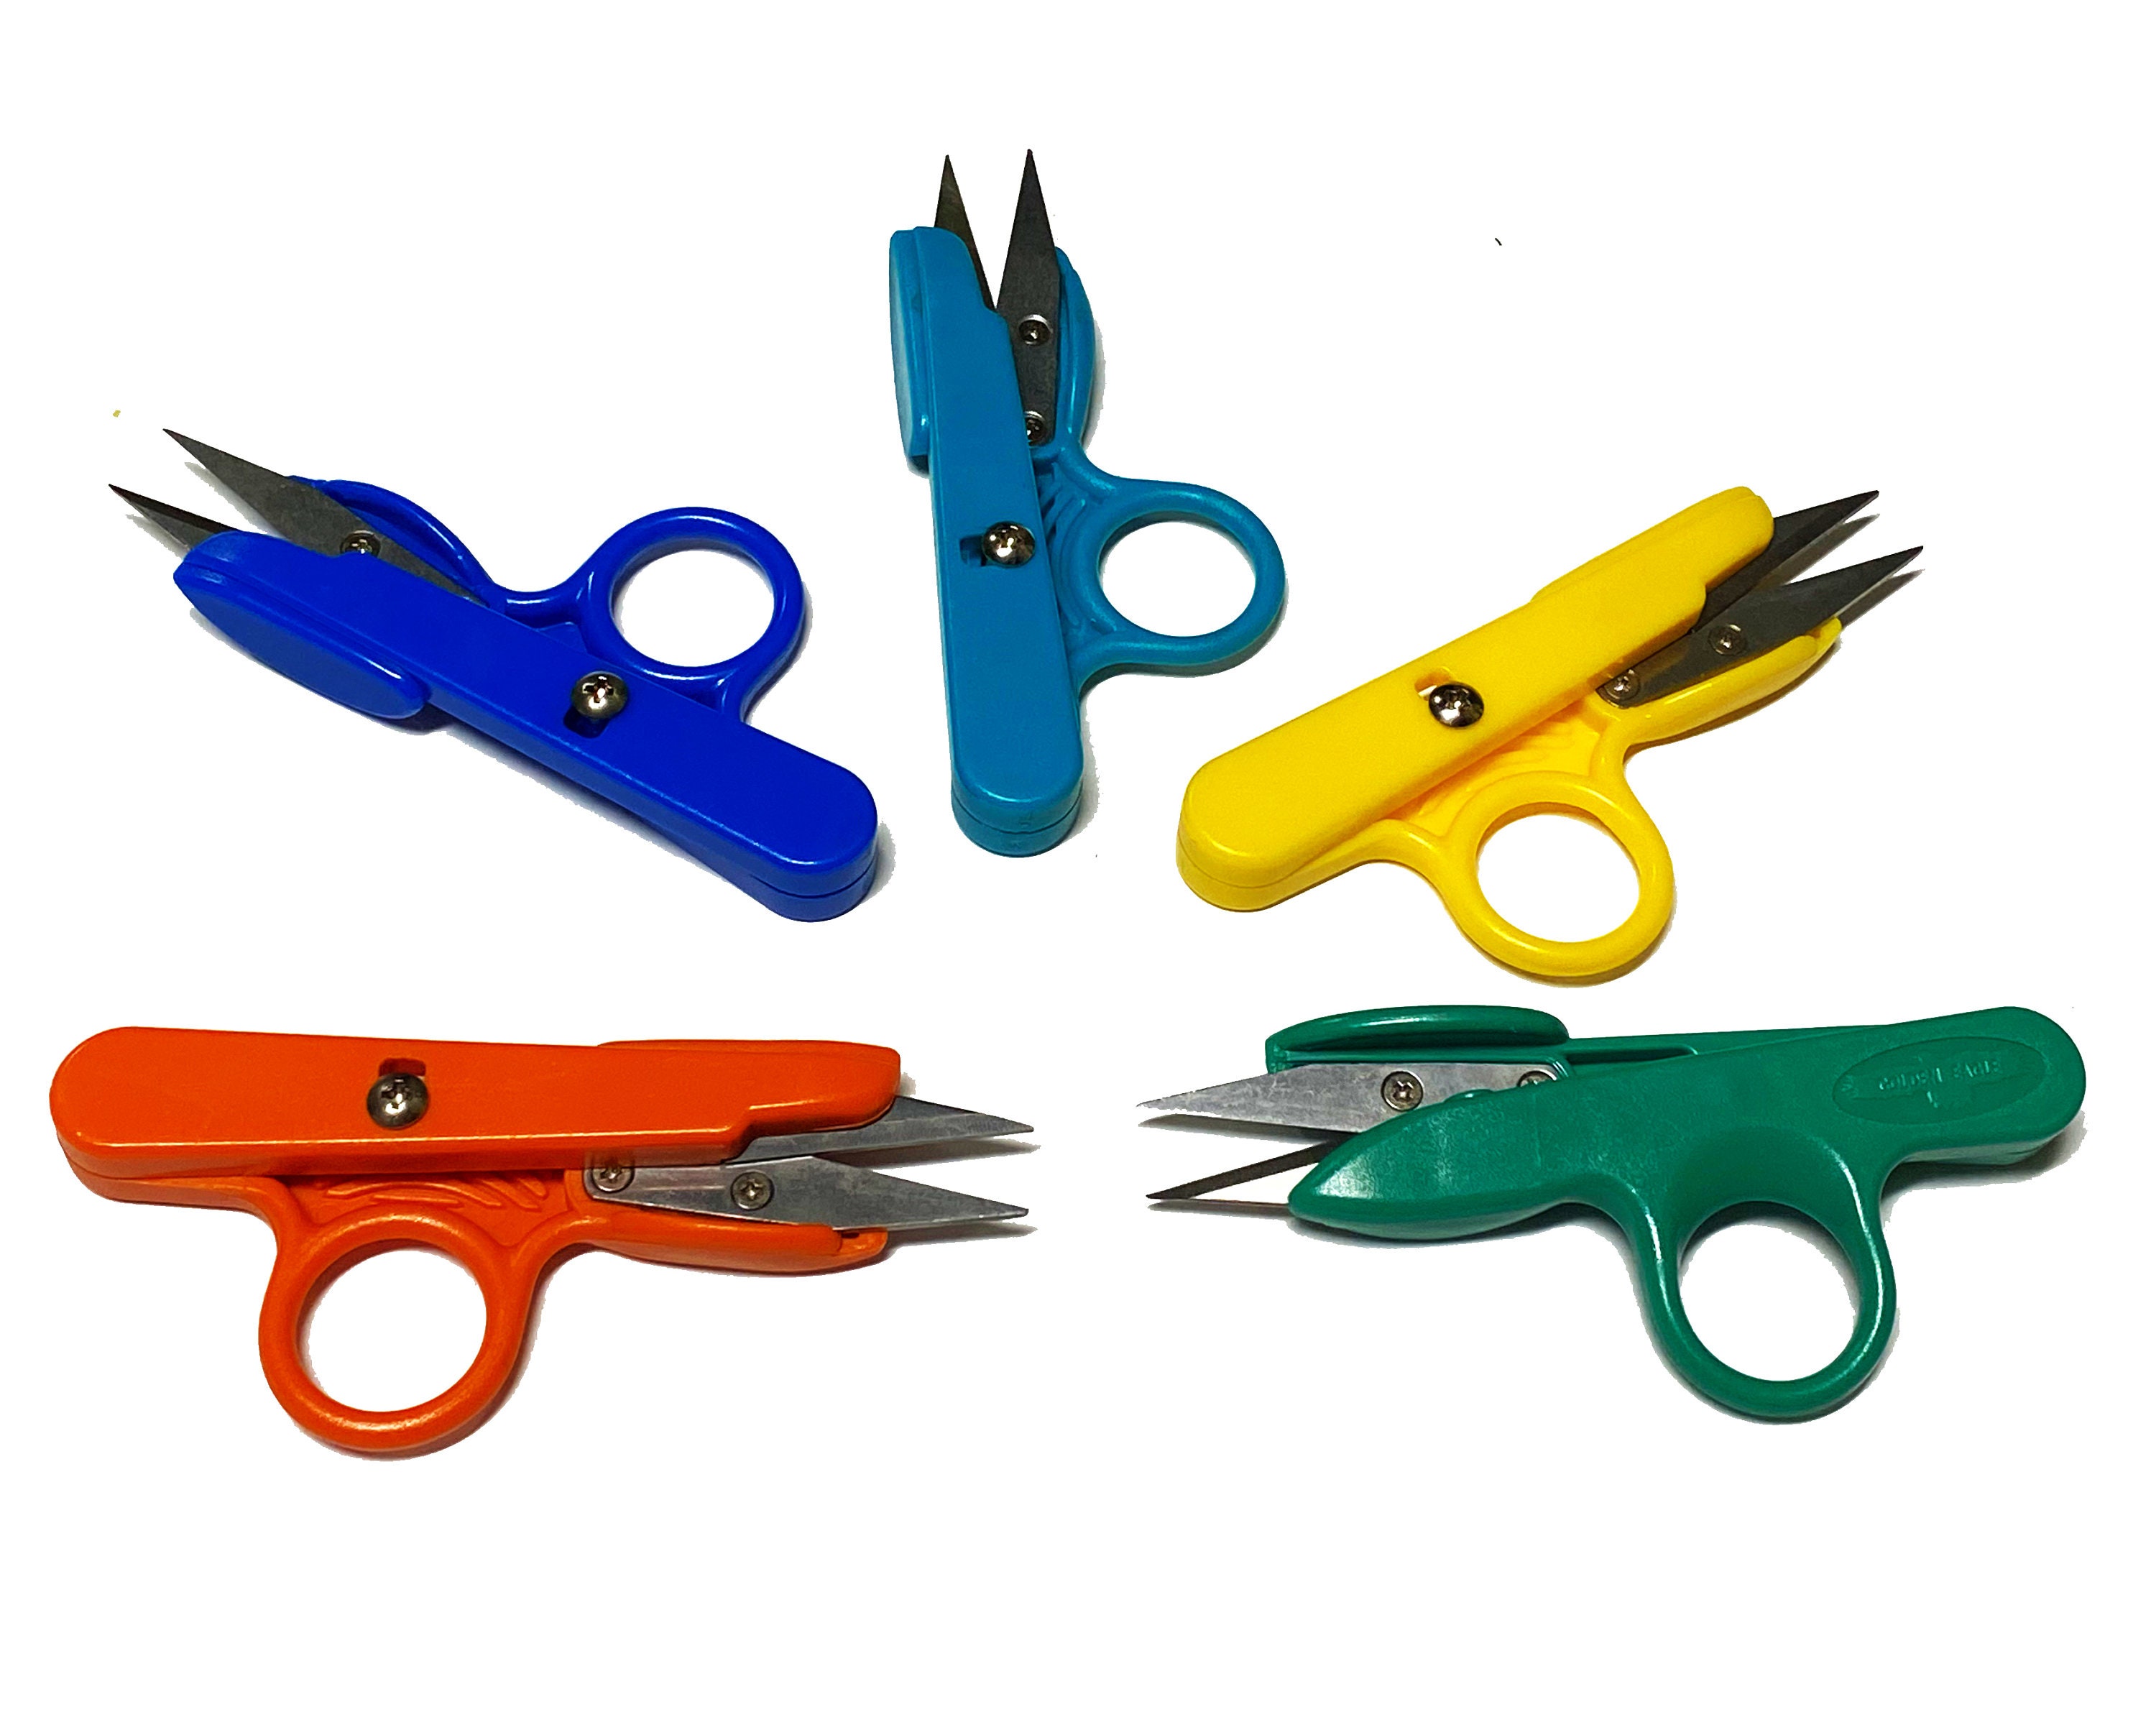 Golden Eagle All Metal Thread Nippers - Sewing Nippers / Cutter